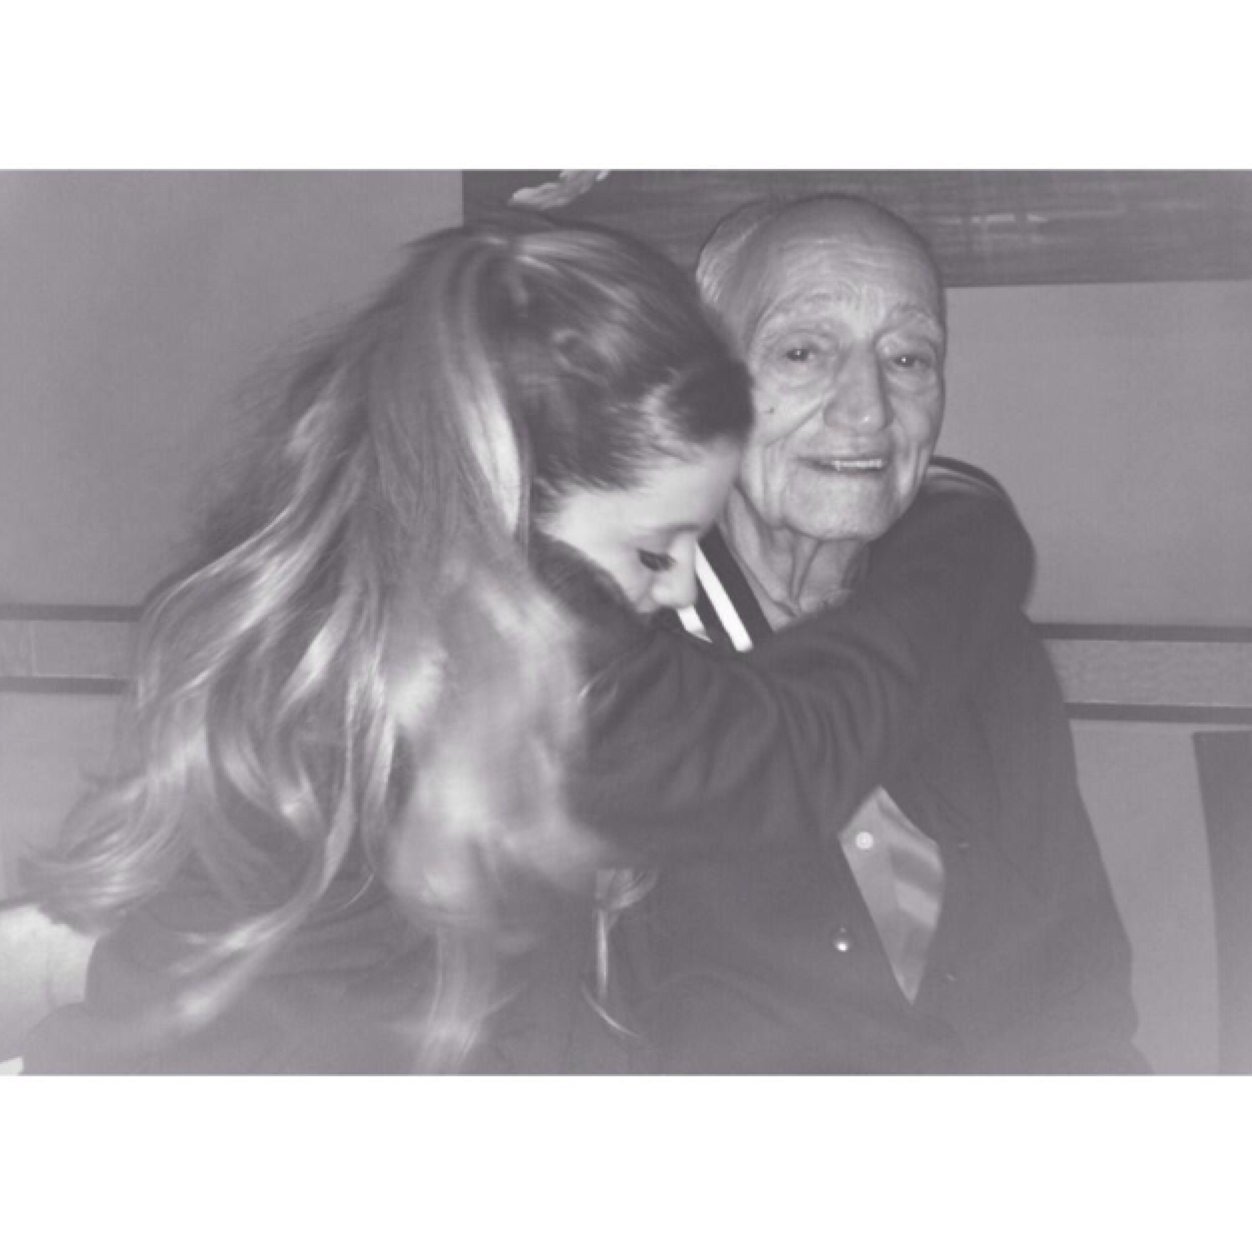 nothing makes me happier than strings and a modulation ♡ my fans are family @arianagrande